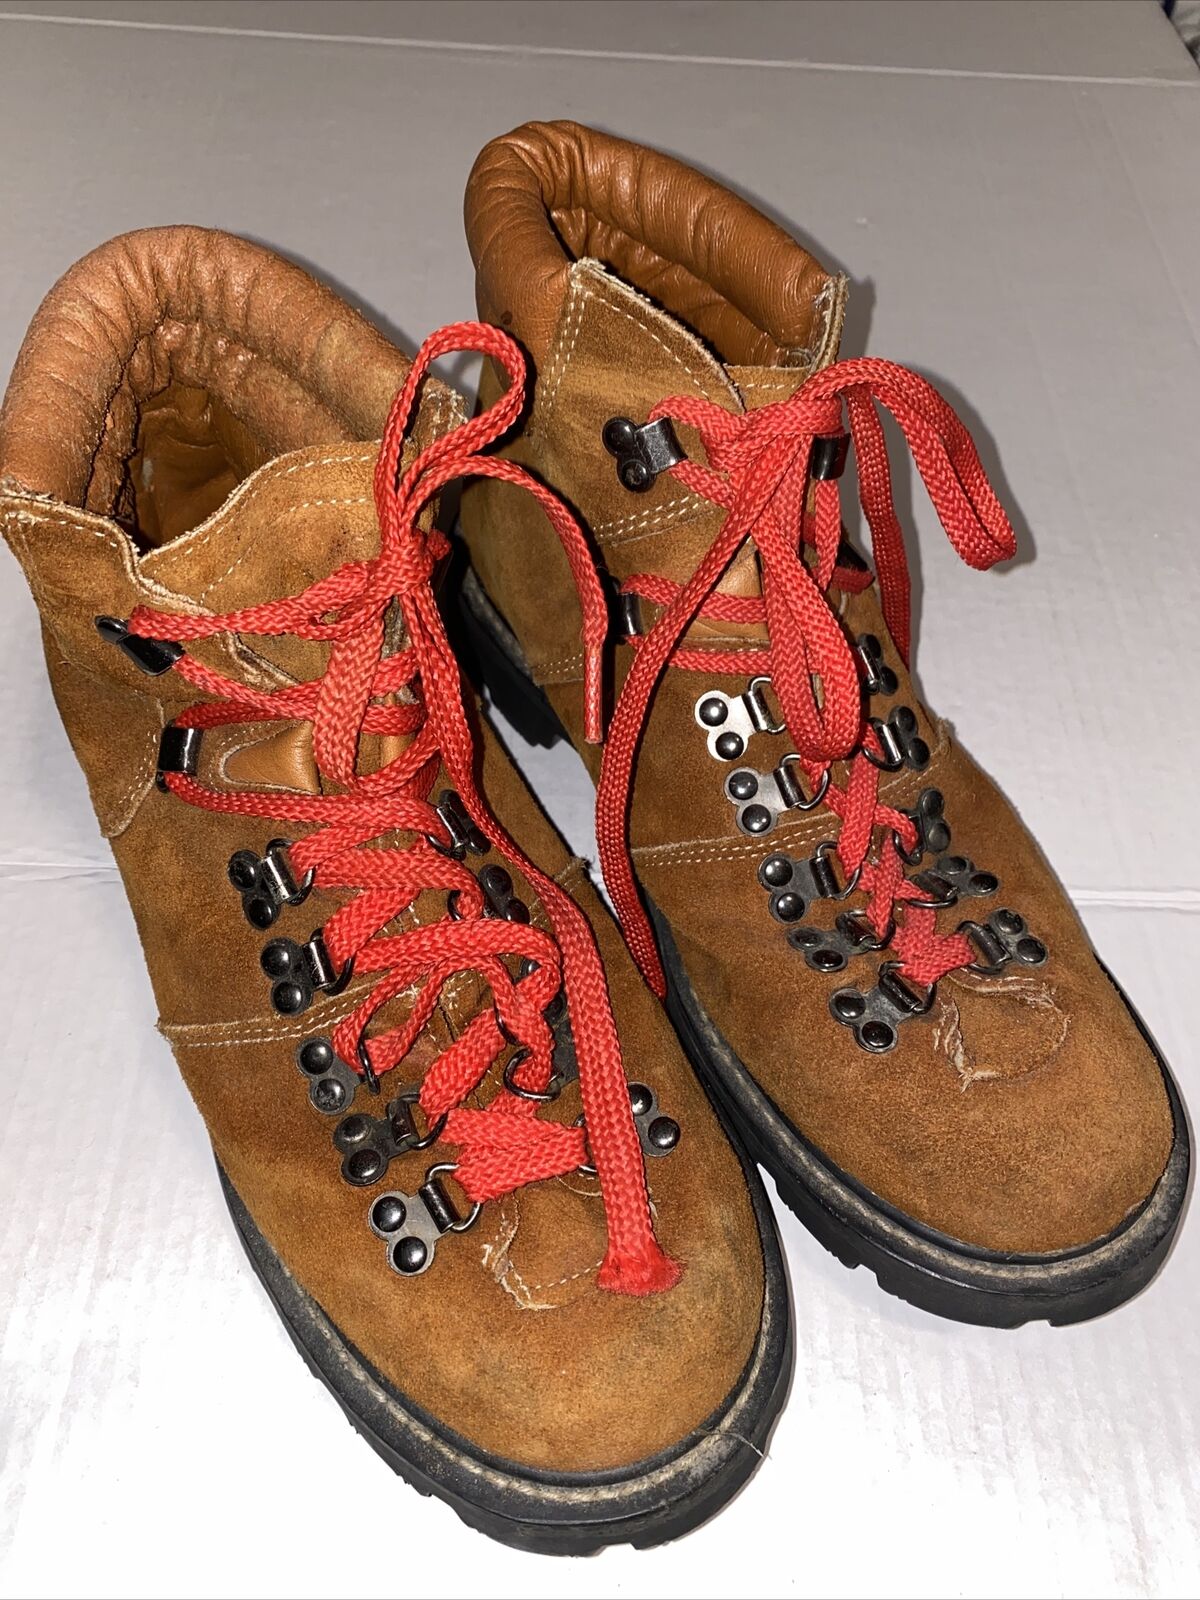 Vintage MontBlanc Men’s Hiking Boots Size 9.5D Suede Leather Sears Red Laces